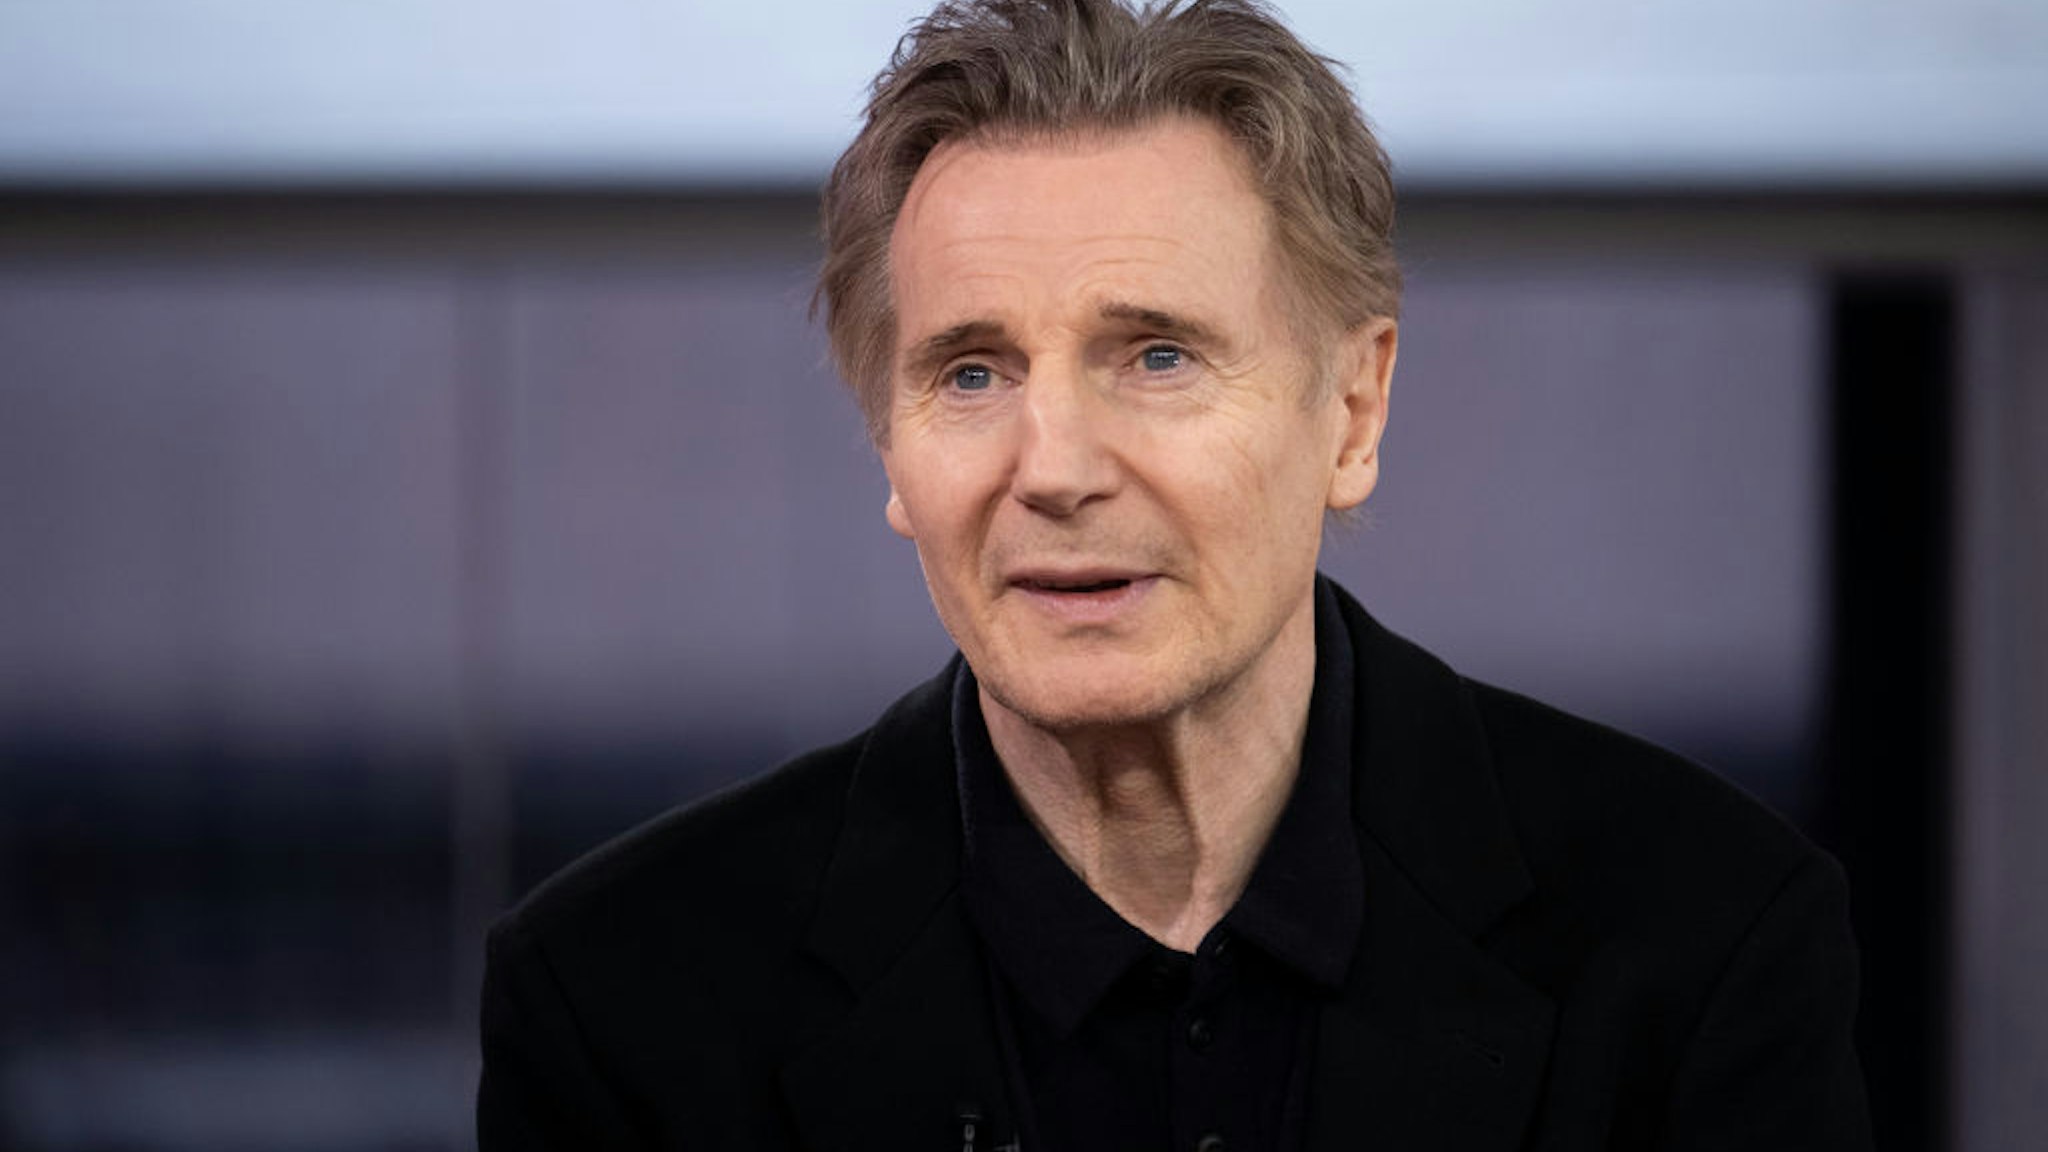 TODAY -- Pictured: Liam Neeson on Wednesday, February 15, 2023 -- (Photo by: Nathan Congleton/NBC via Getty Images)